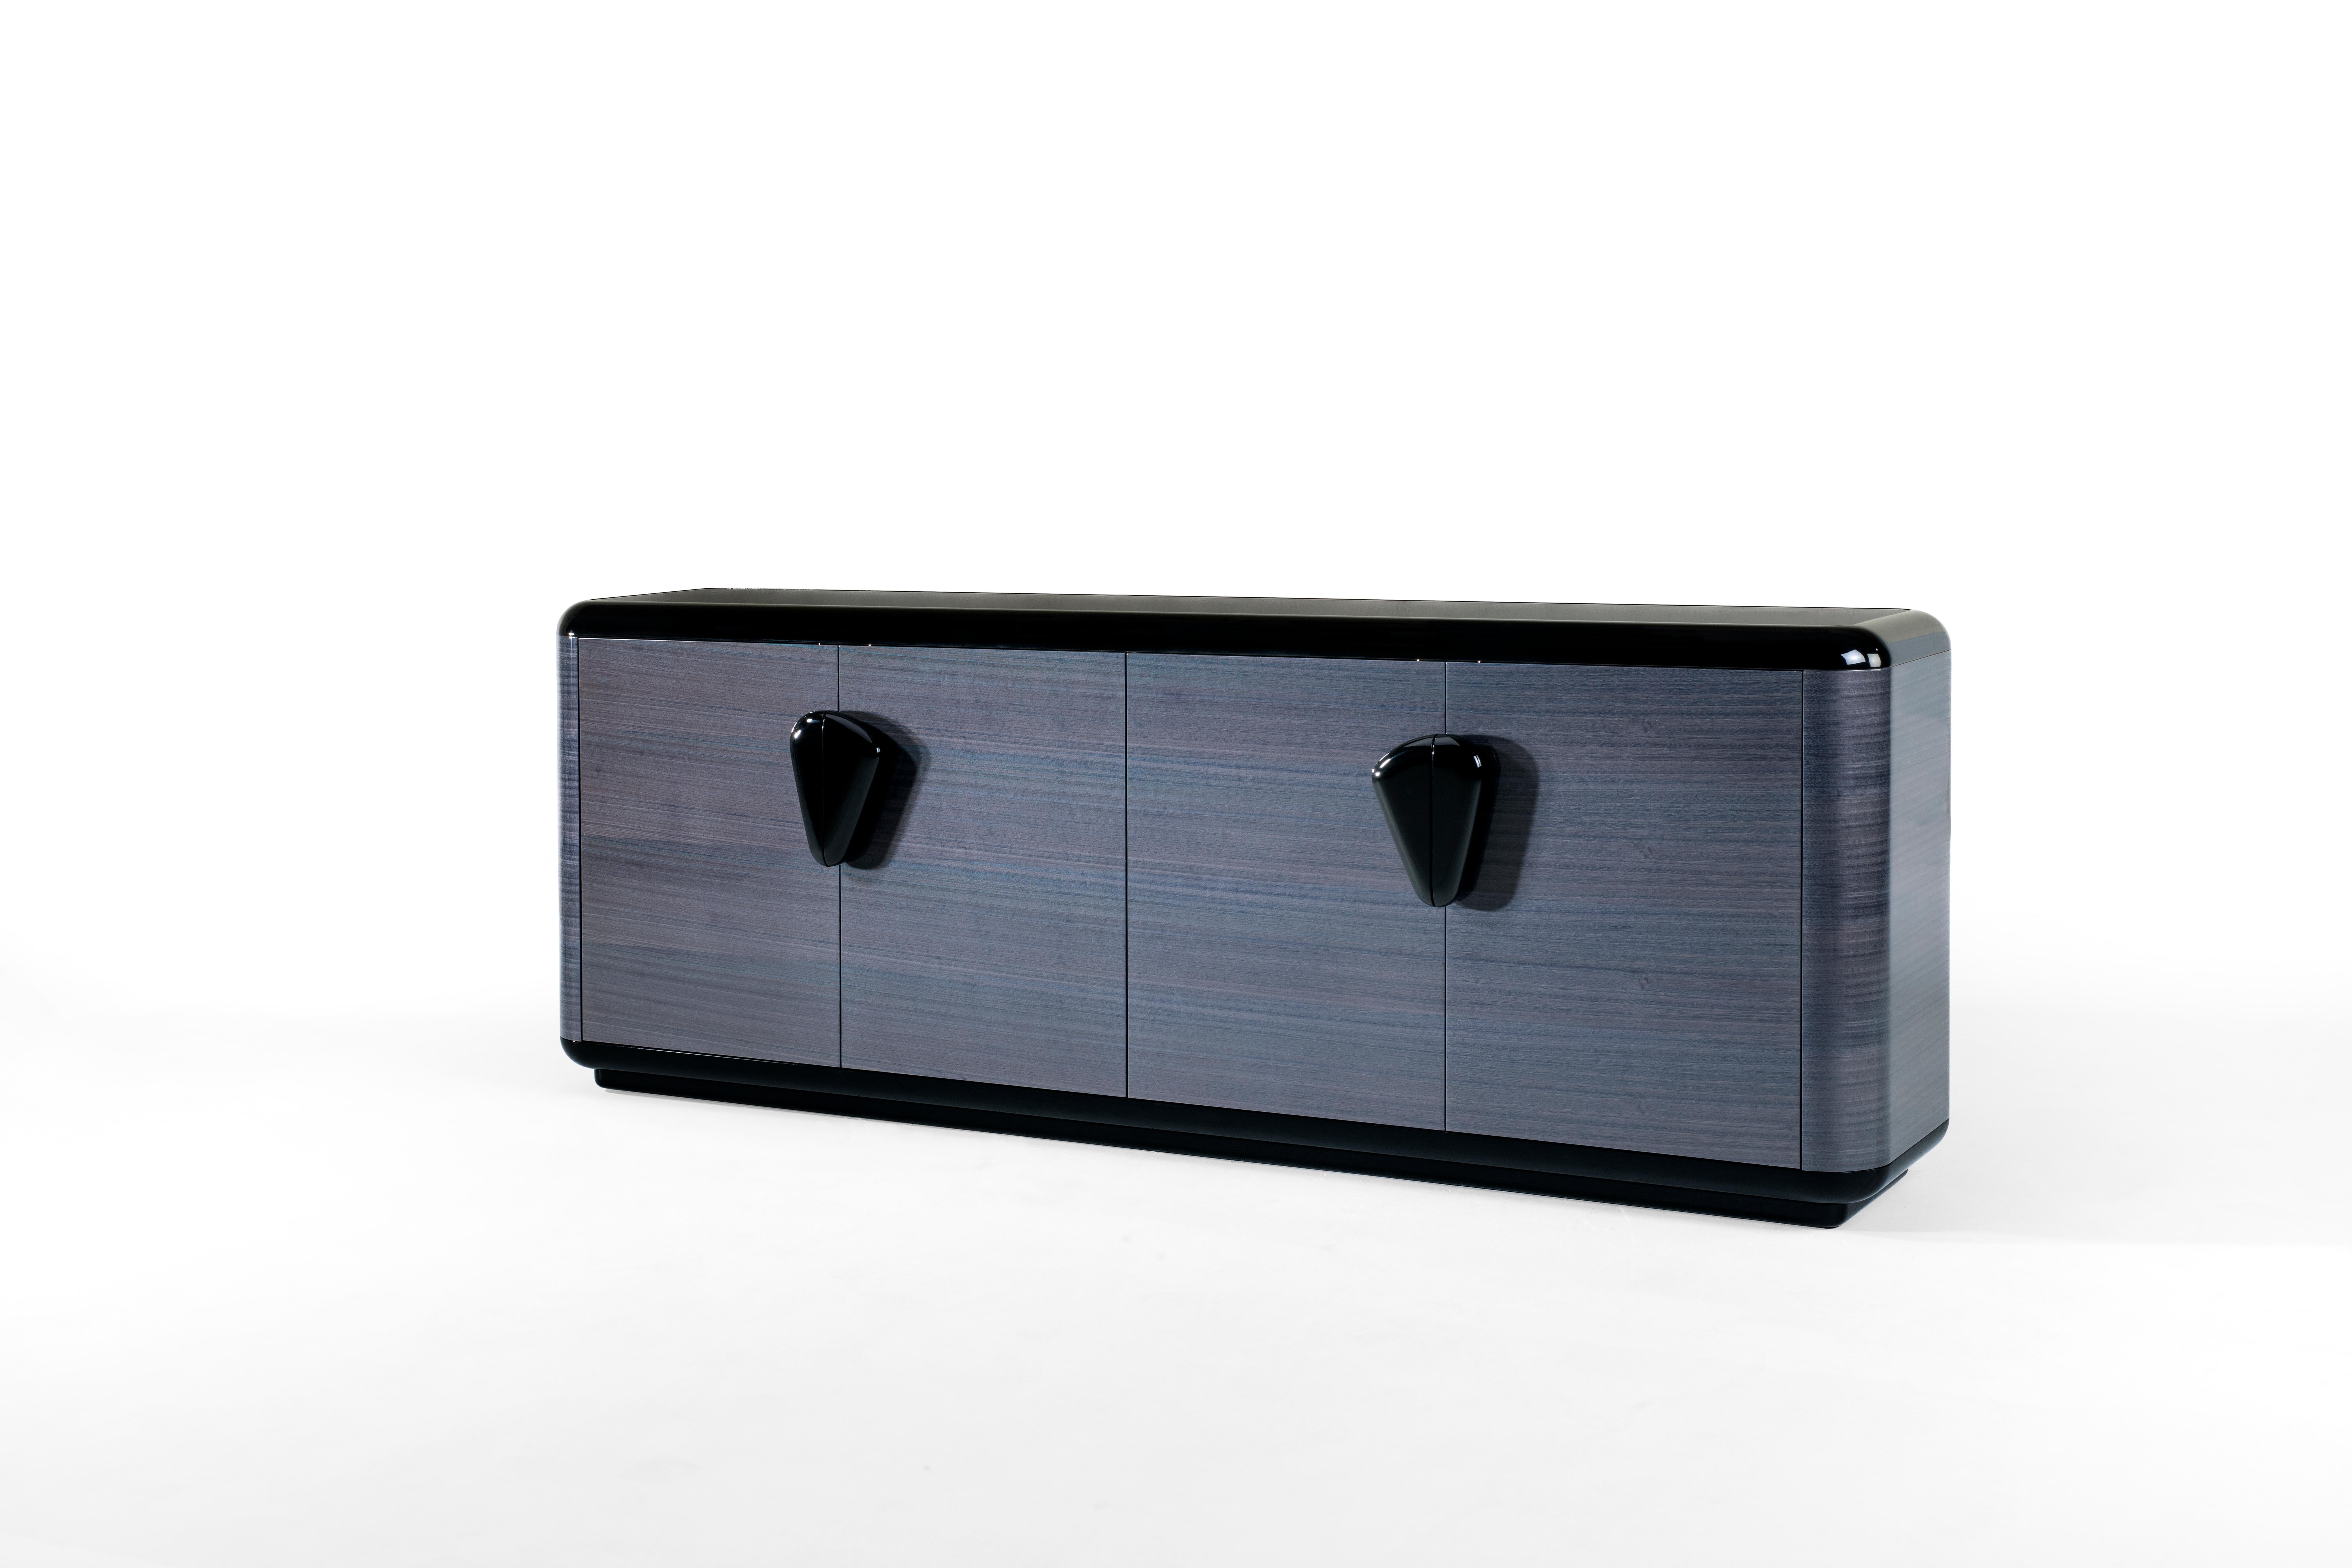 The ZULU sideboard is inspired by the concepts of style and function, in which form and functionality are reciprocally linked.
The unique handles and black glass top are proof of meticulous attention to every little detail, without forgetting the